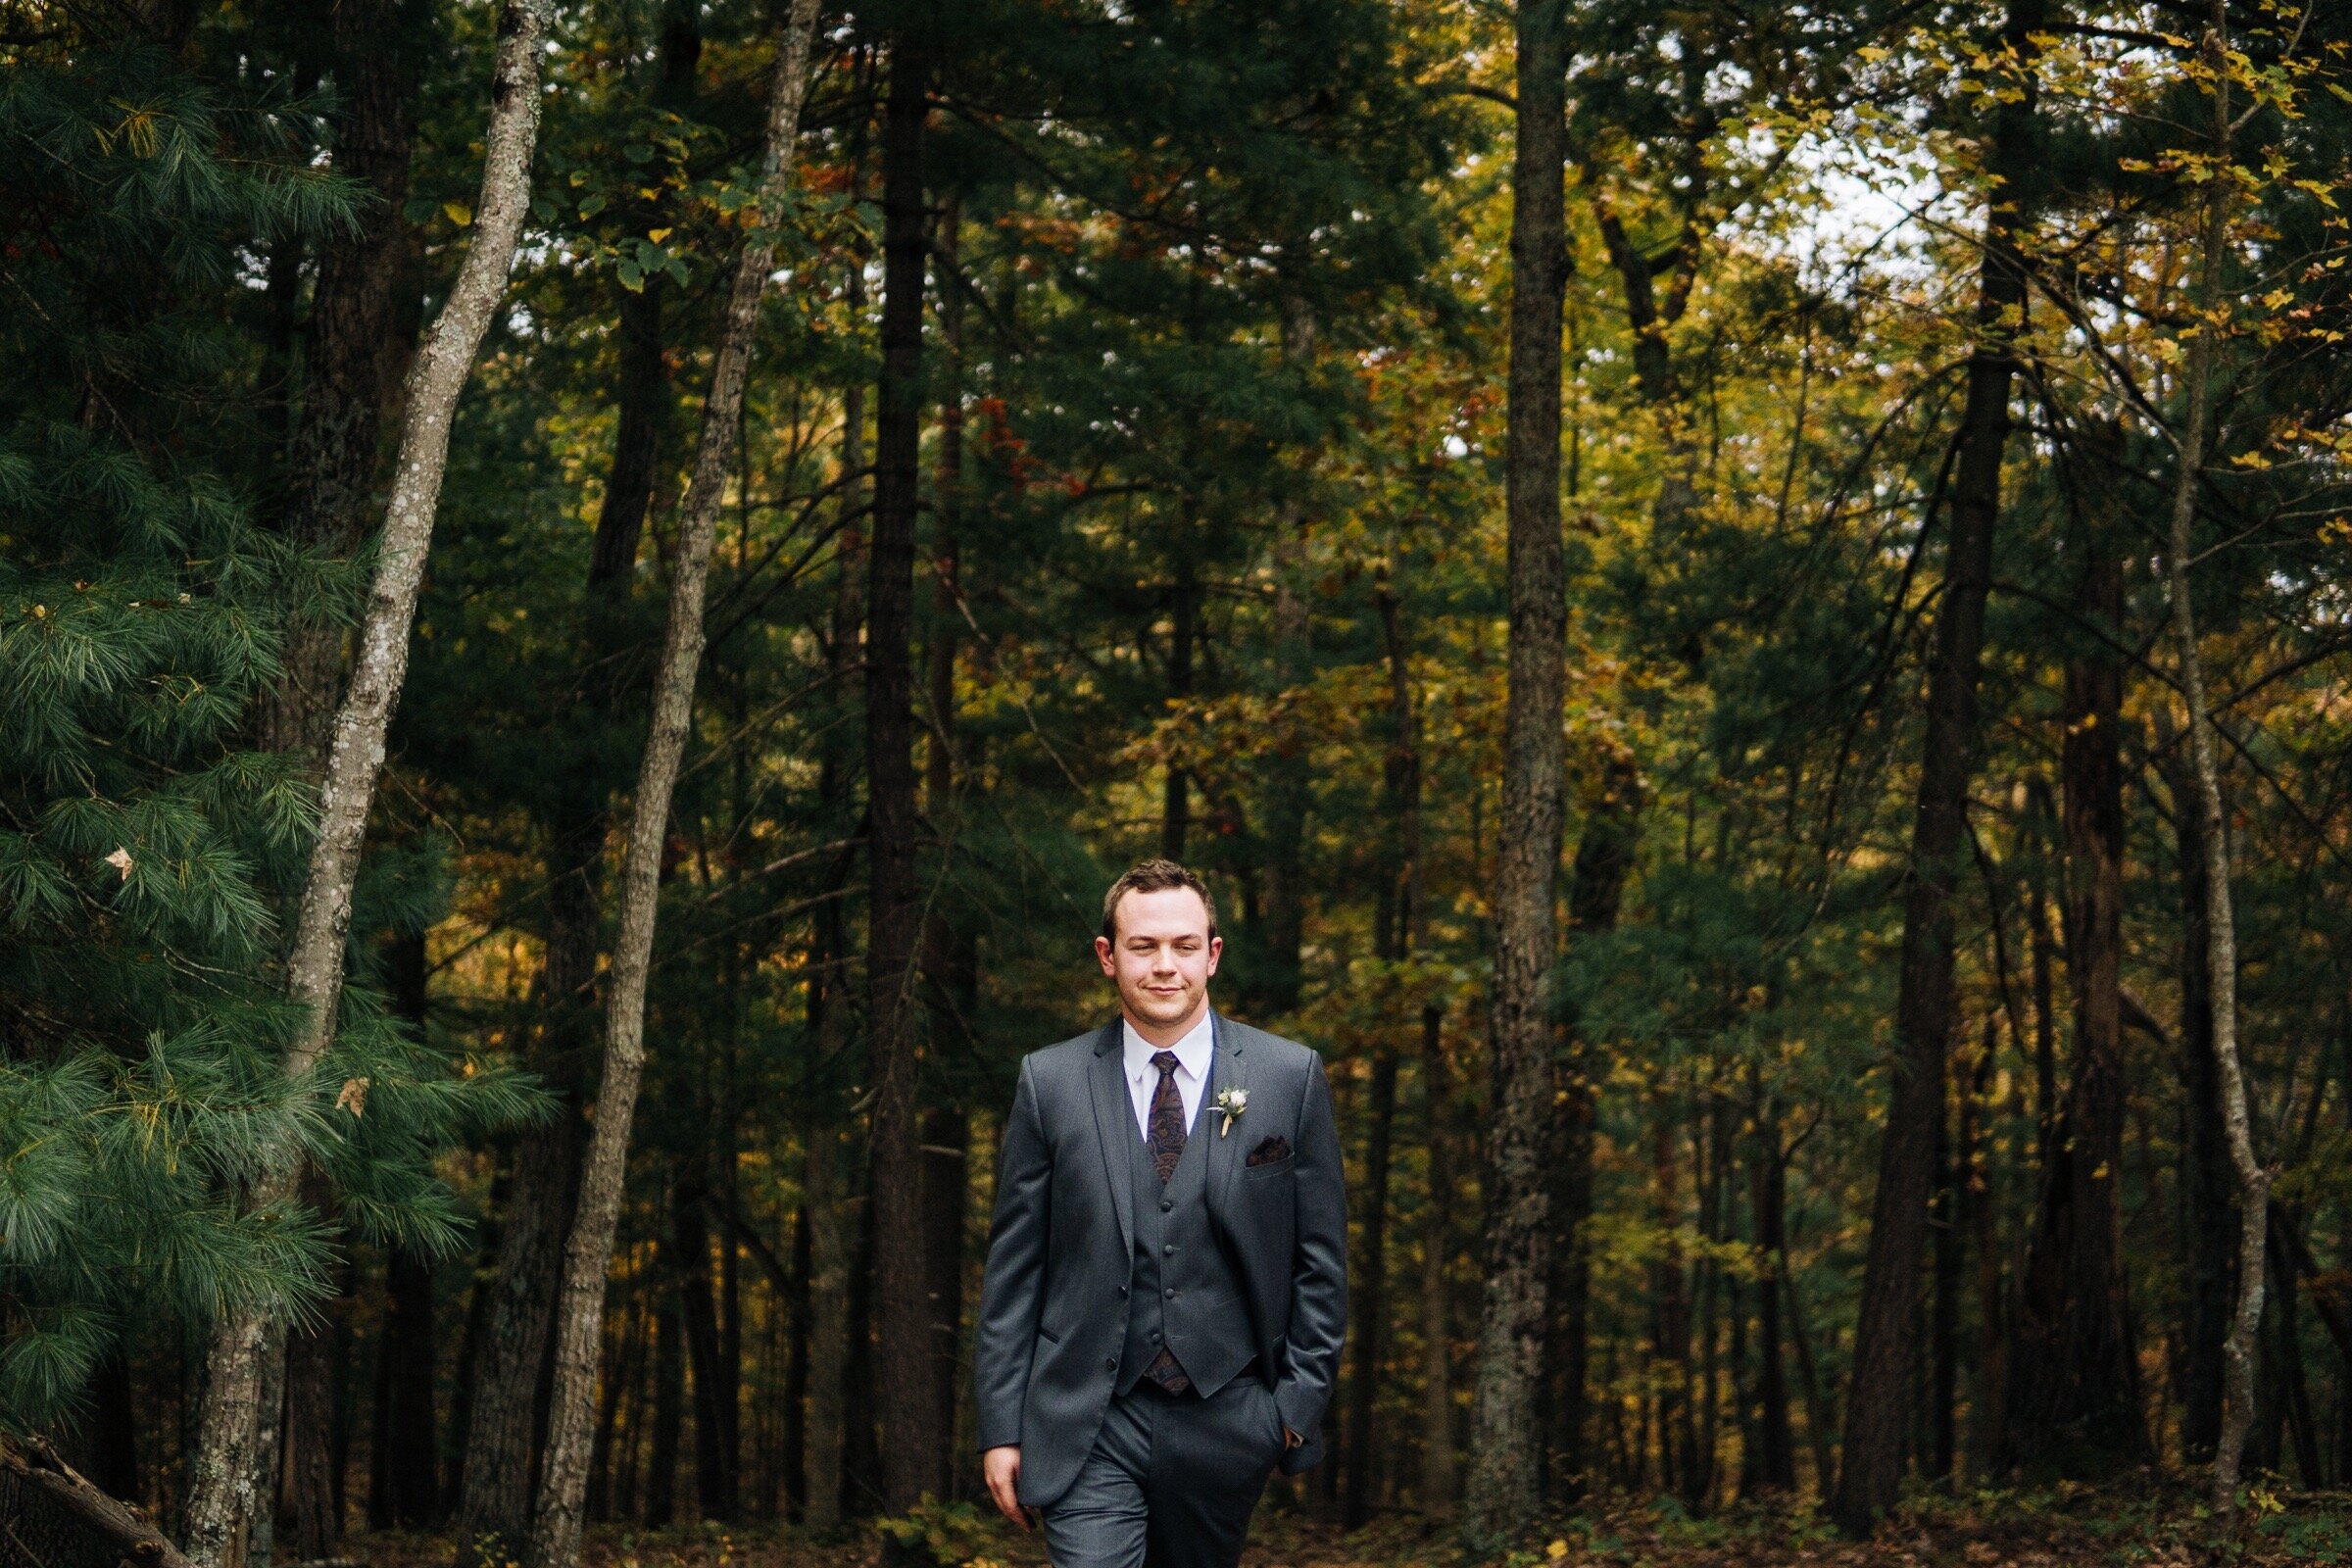 Garrett & Caitlin's Fall Wedding at the Four Winds at North